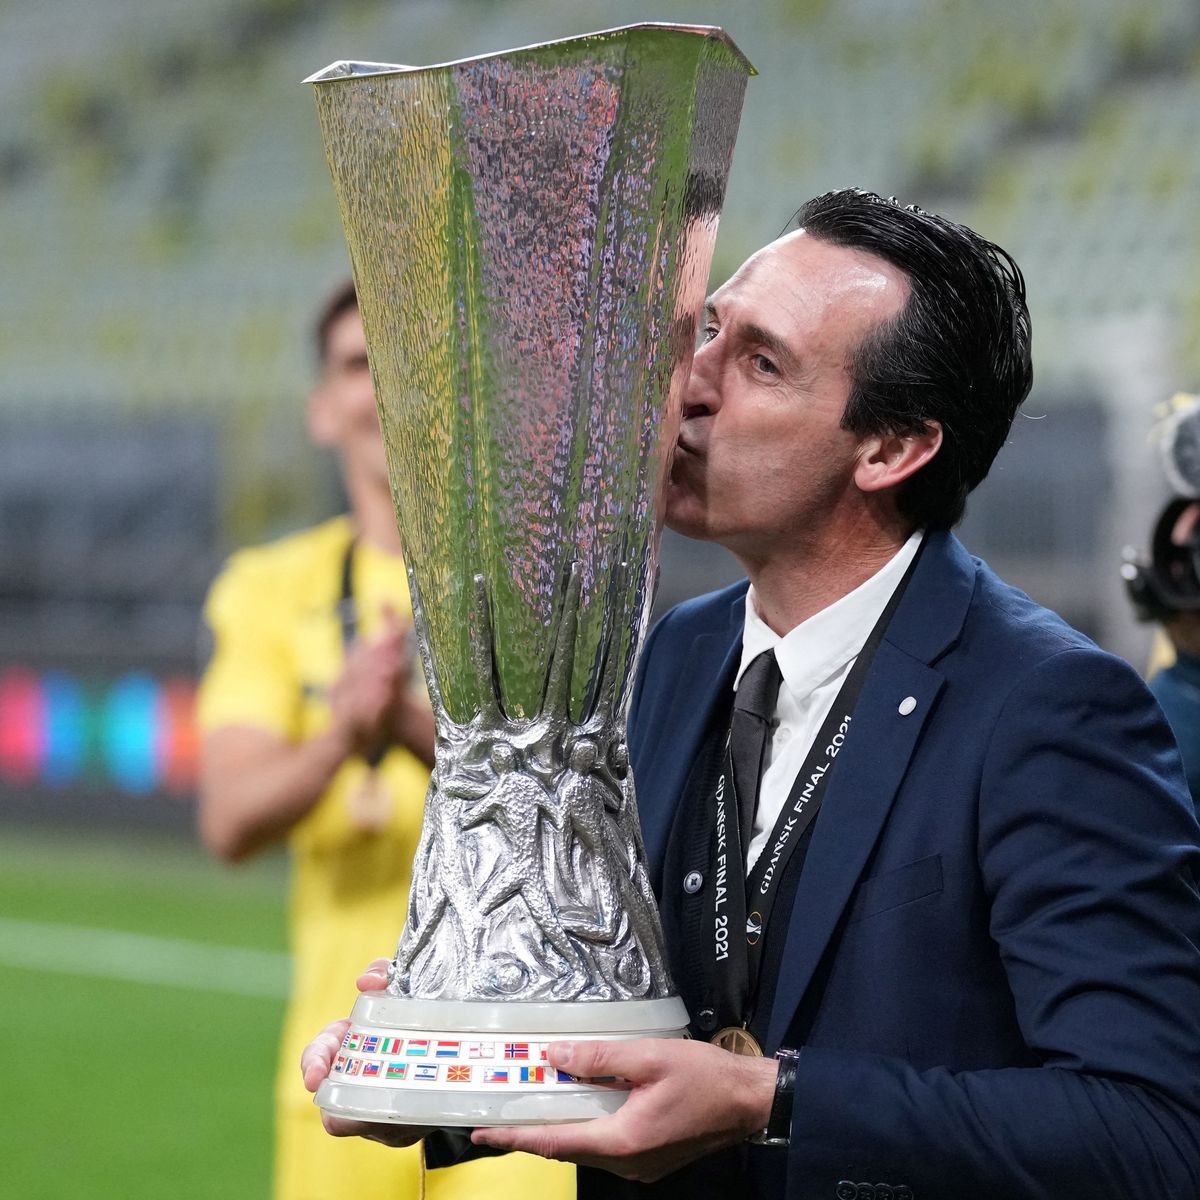 Arsenal is cursed' fans react after Unai Emery wins Europa League with Villarreal